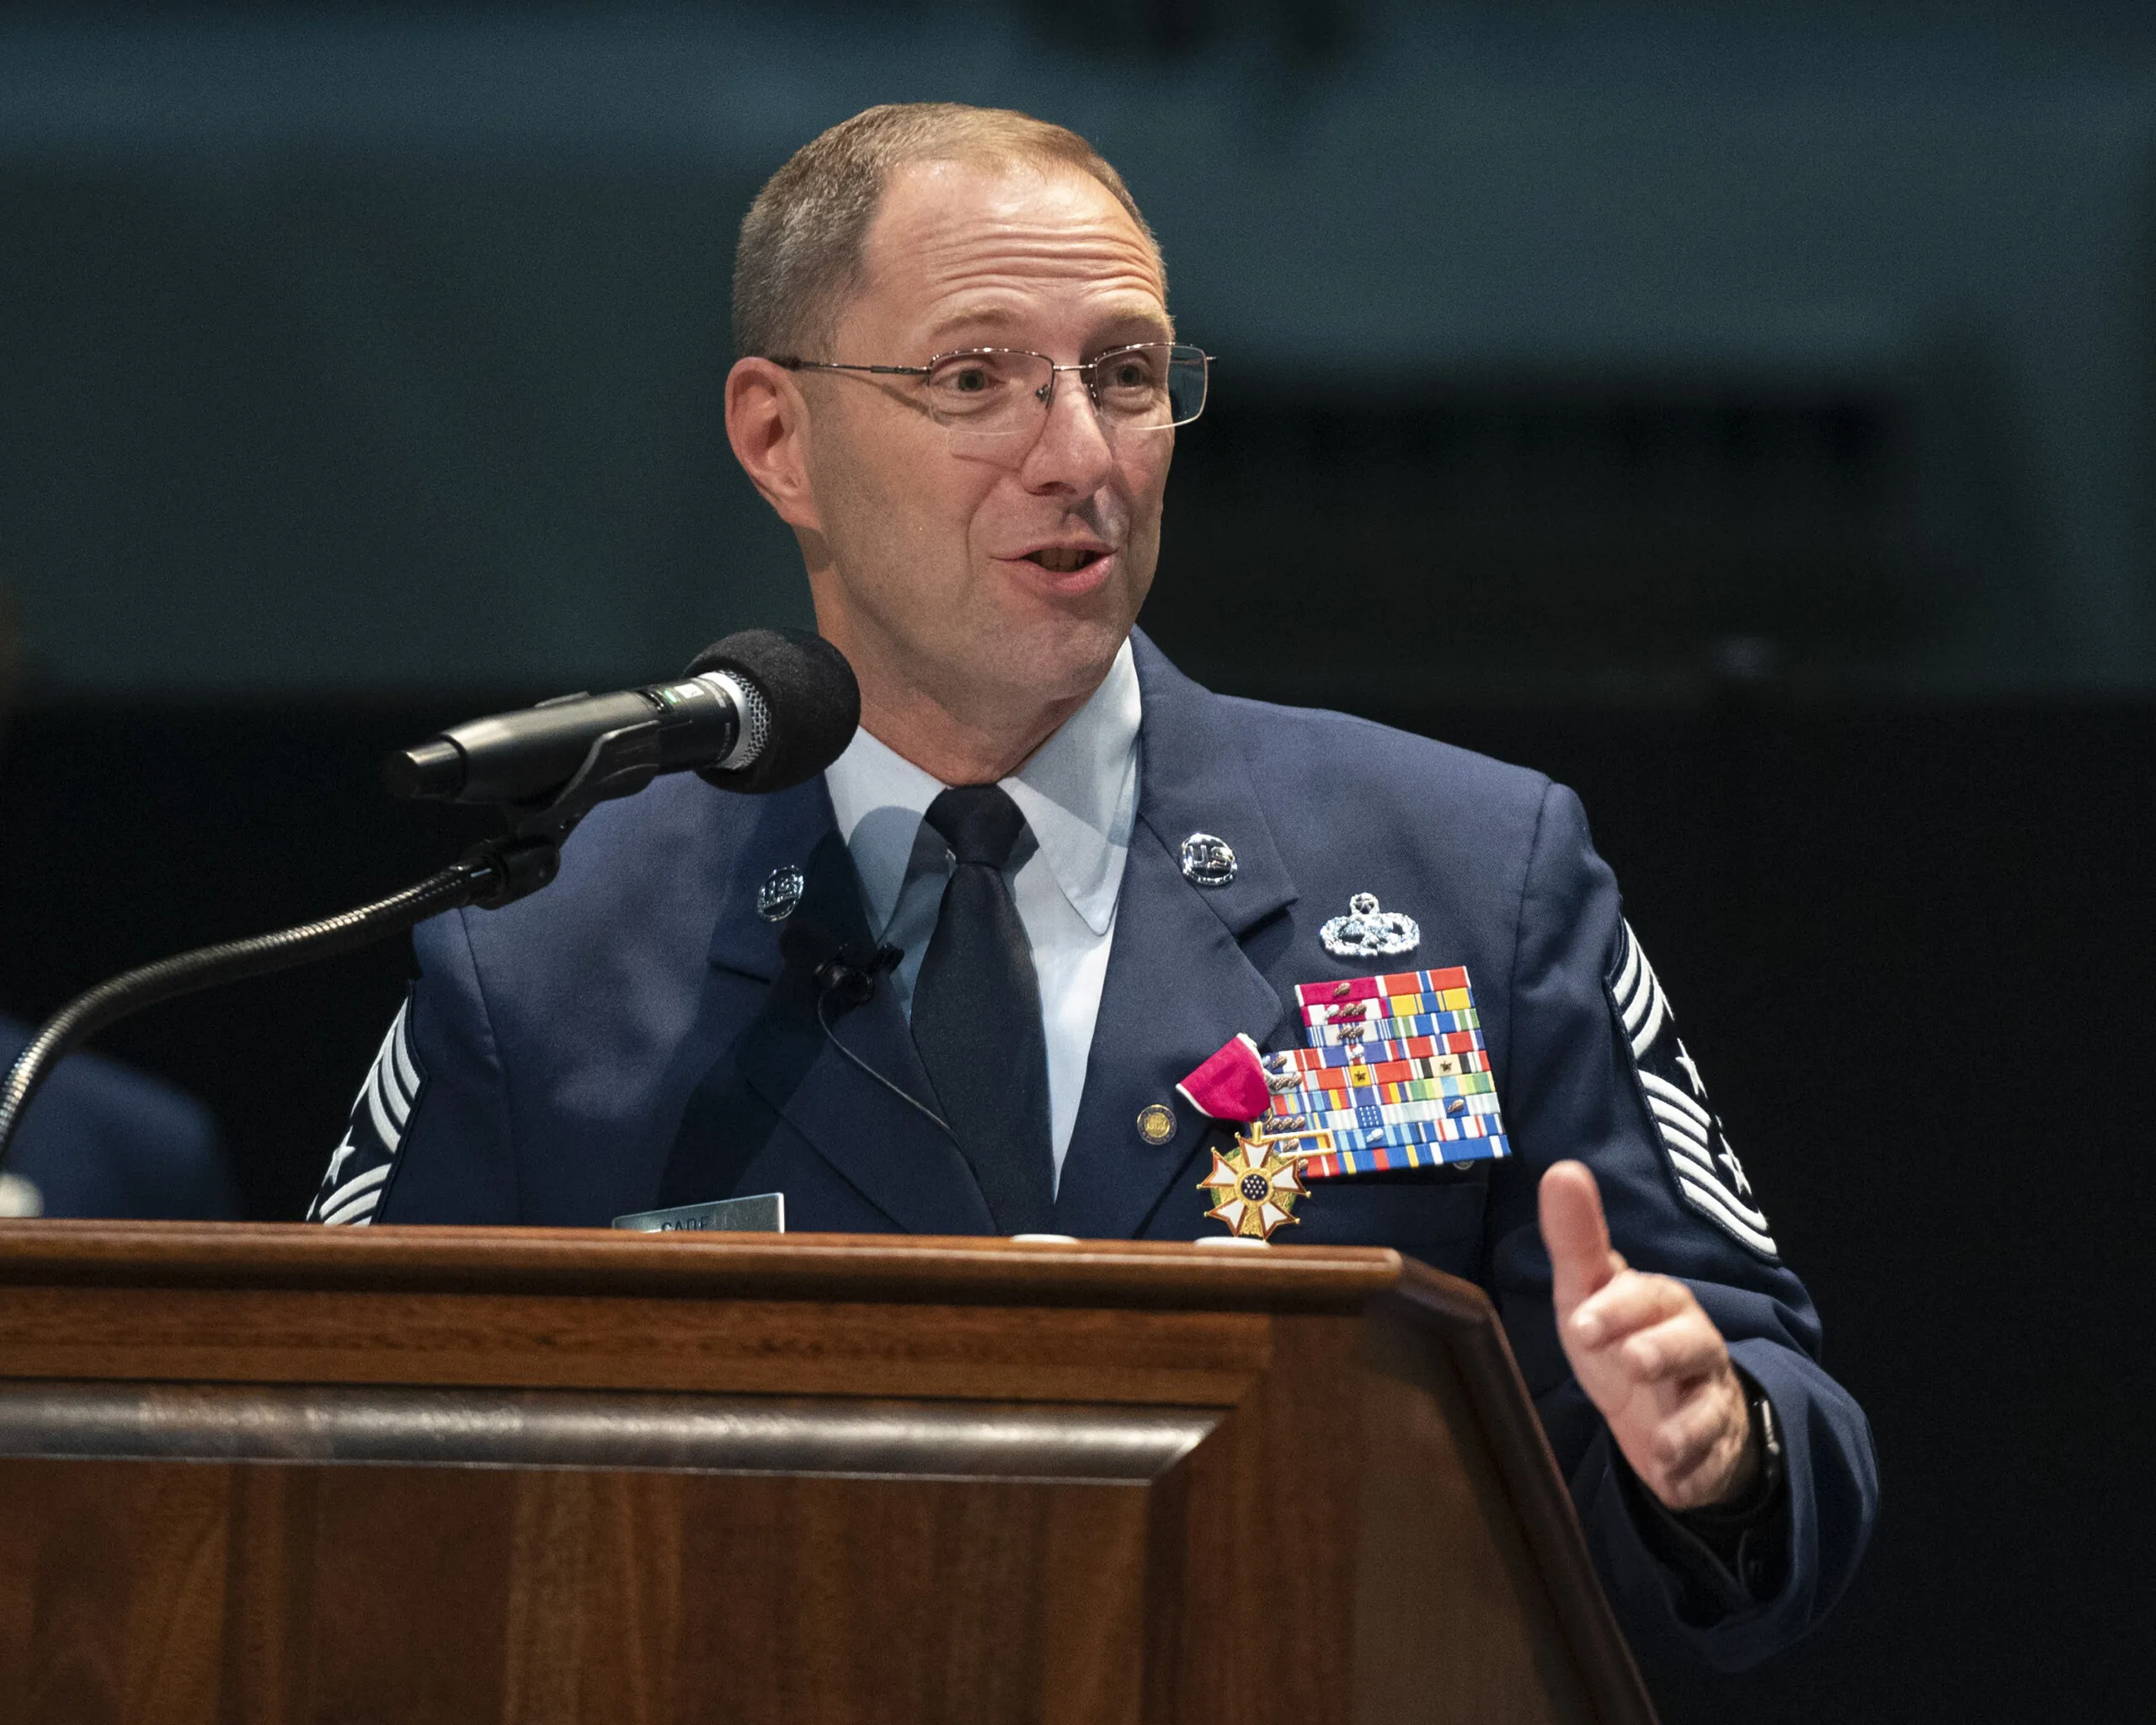 Retiring general says command of Edwards AFB was ‘An Honor’